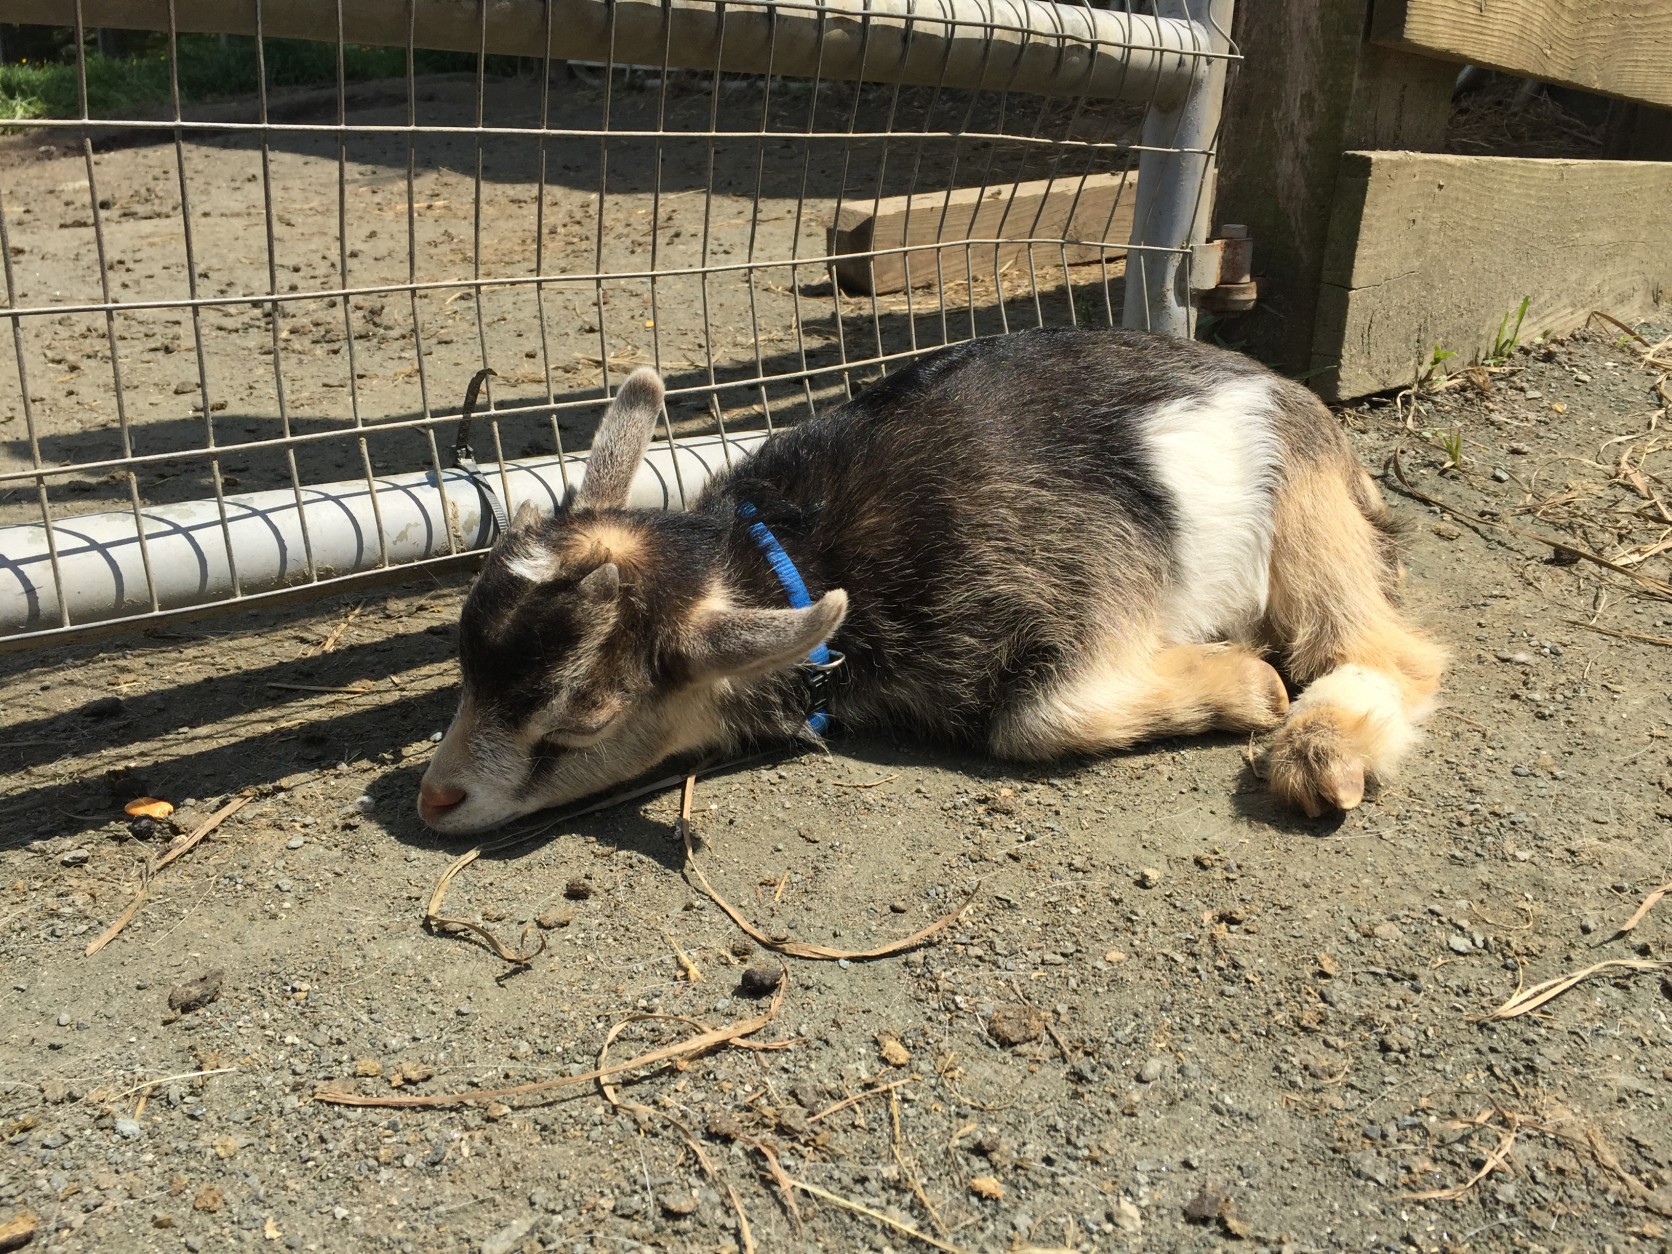 Time for a siesta! A baby goat sleeps in the sun. (WTOP/Michelle Basch)